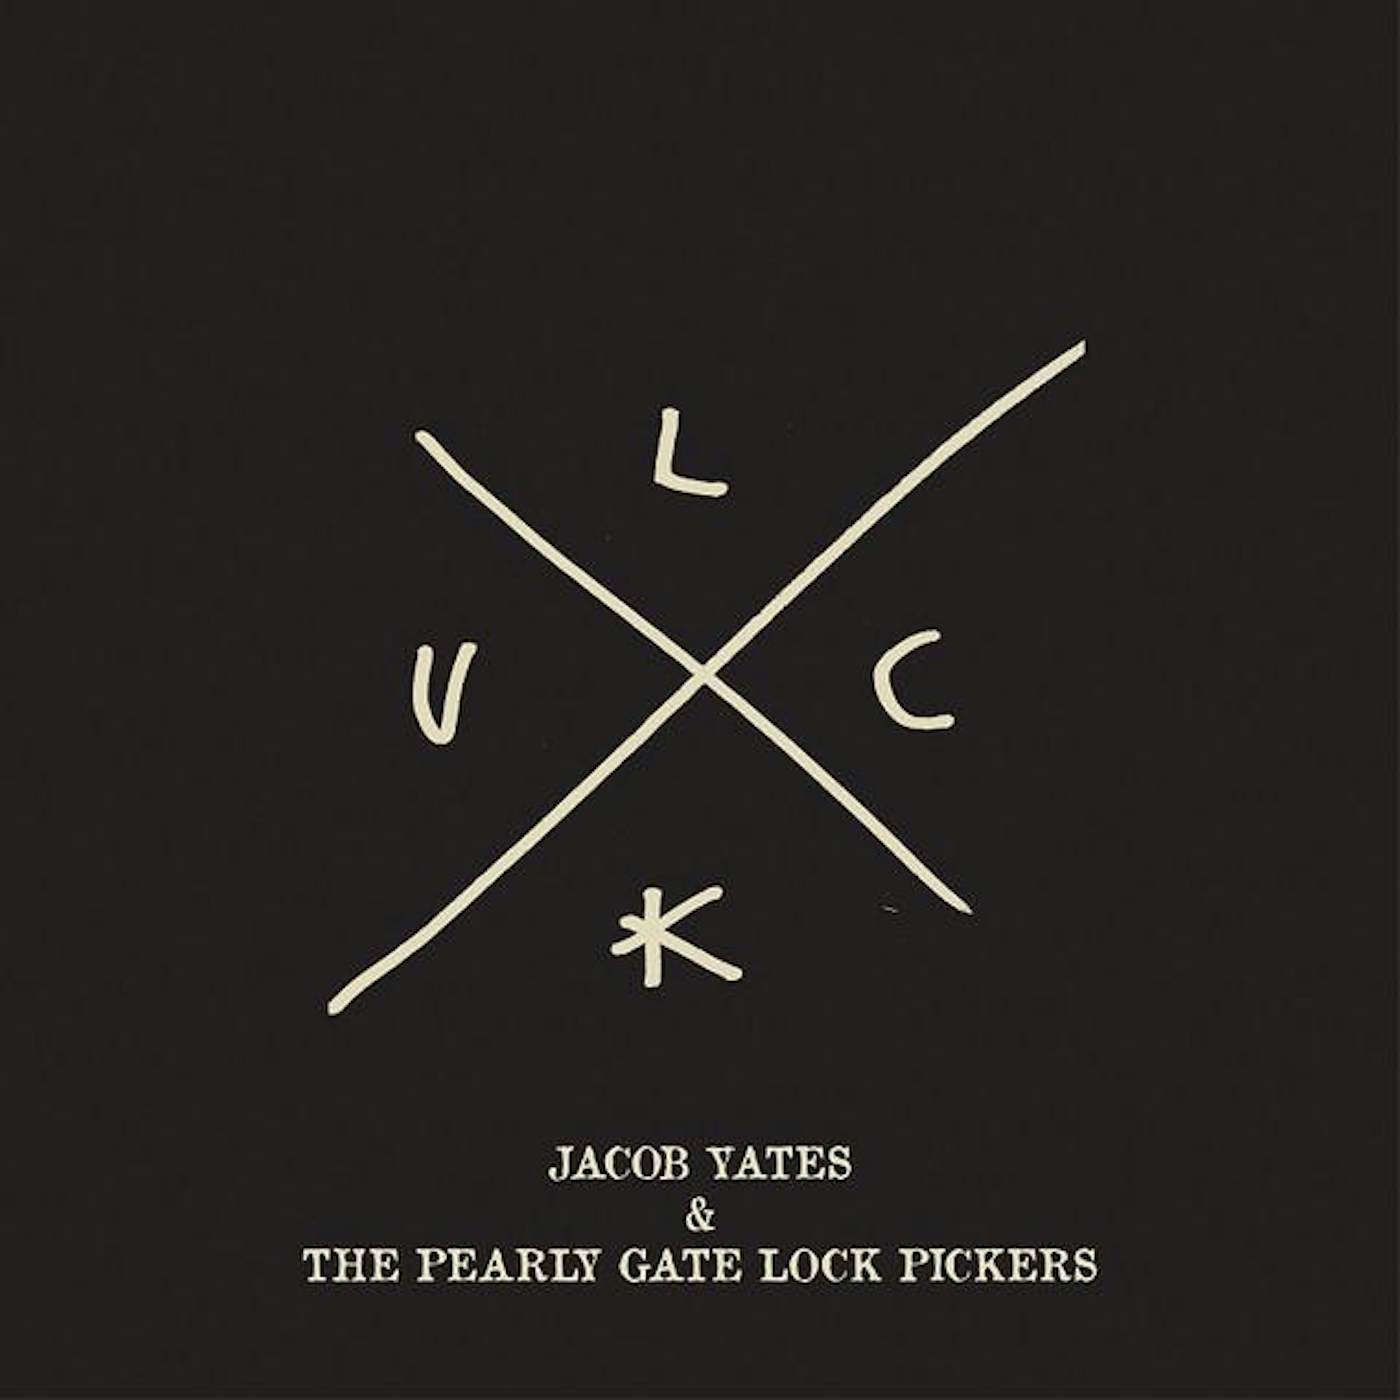 Jacob Yates and the Pearly Gate Lock Pickers